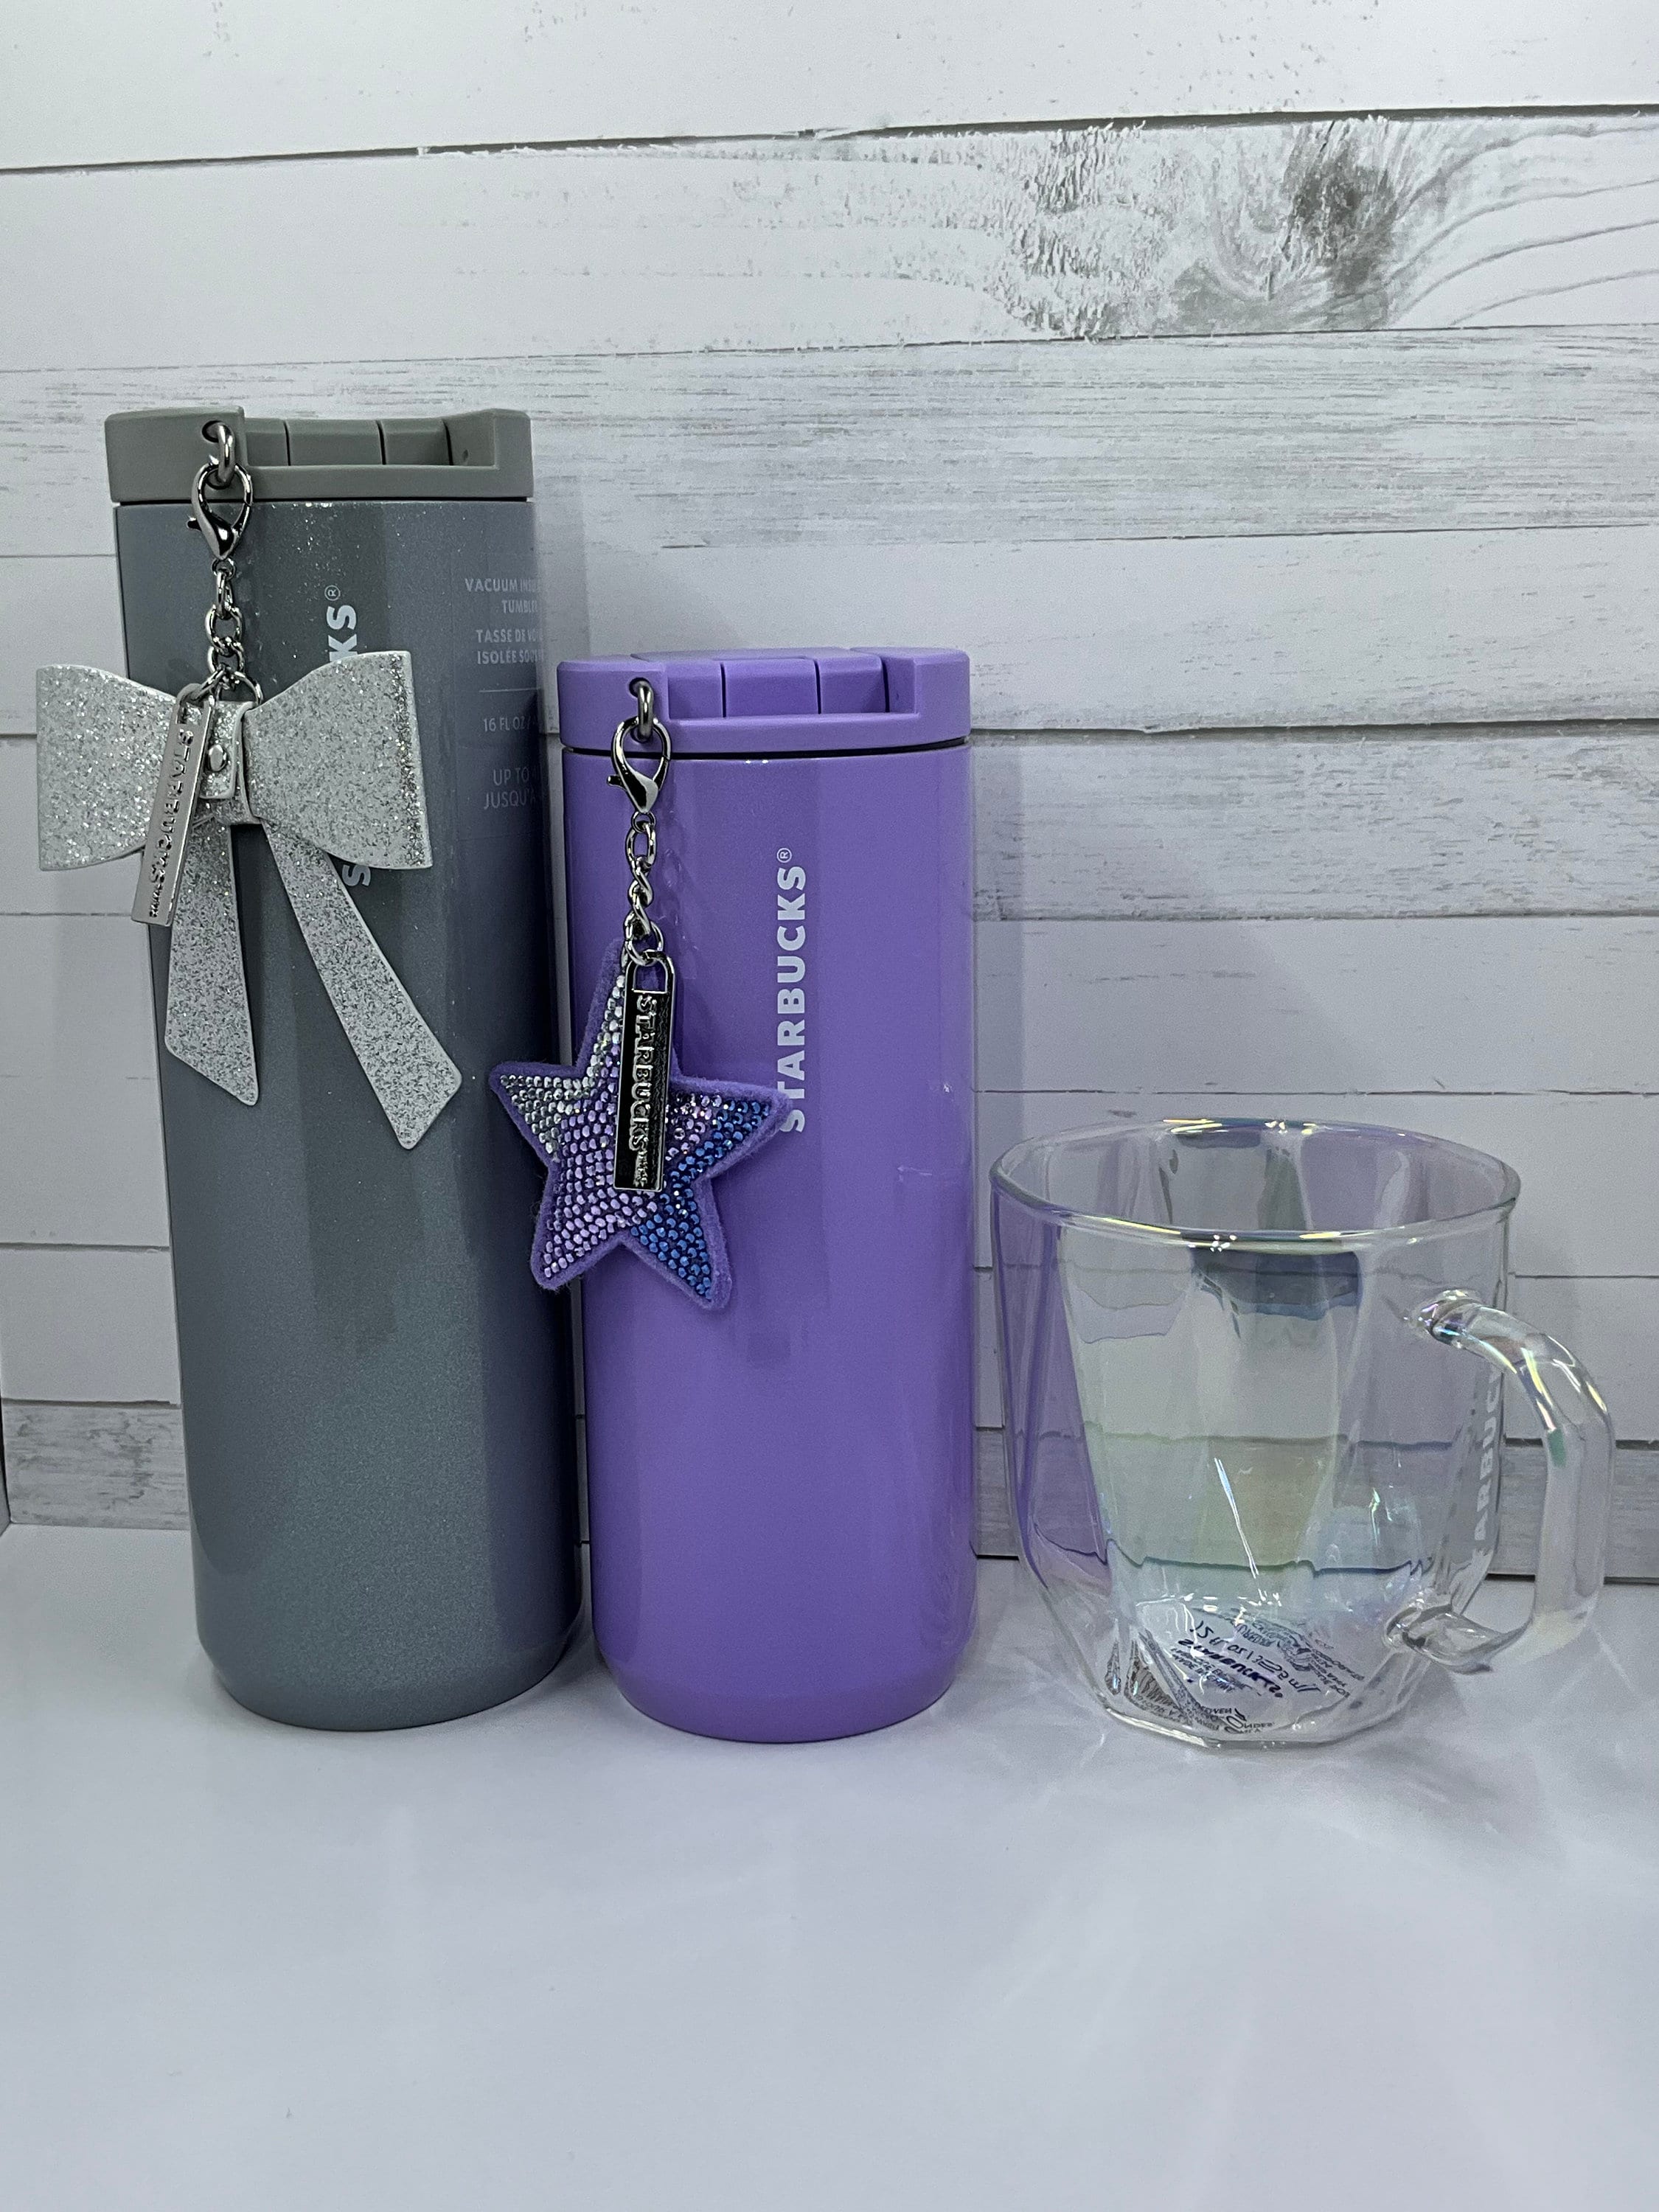 Starbucks' new Lilac Collection features collaboration with Stanley